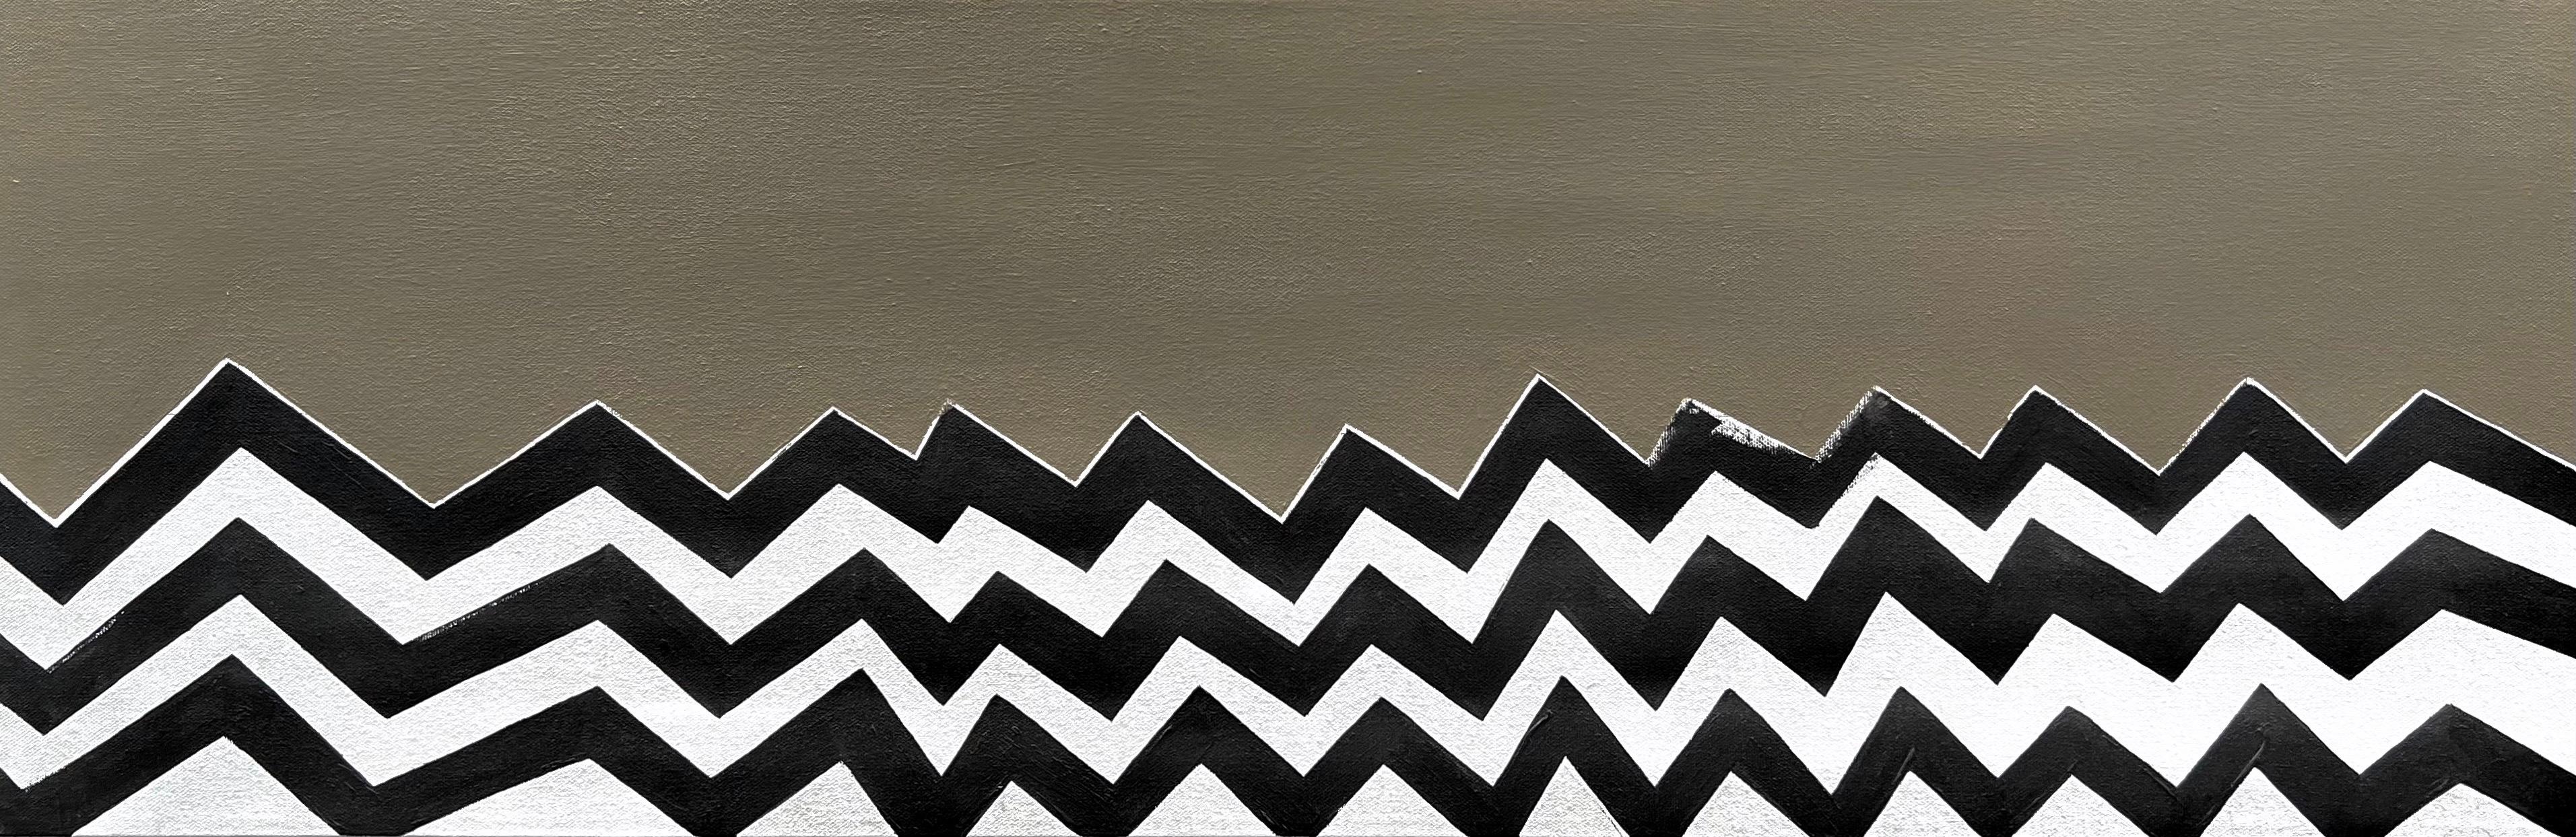 Buzzed (36"x12", Geometric Abstract Painting, Black, White, Camel)